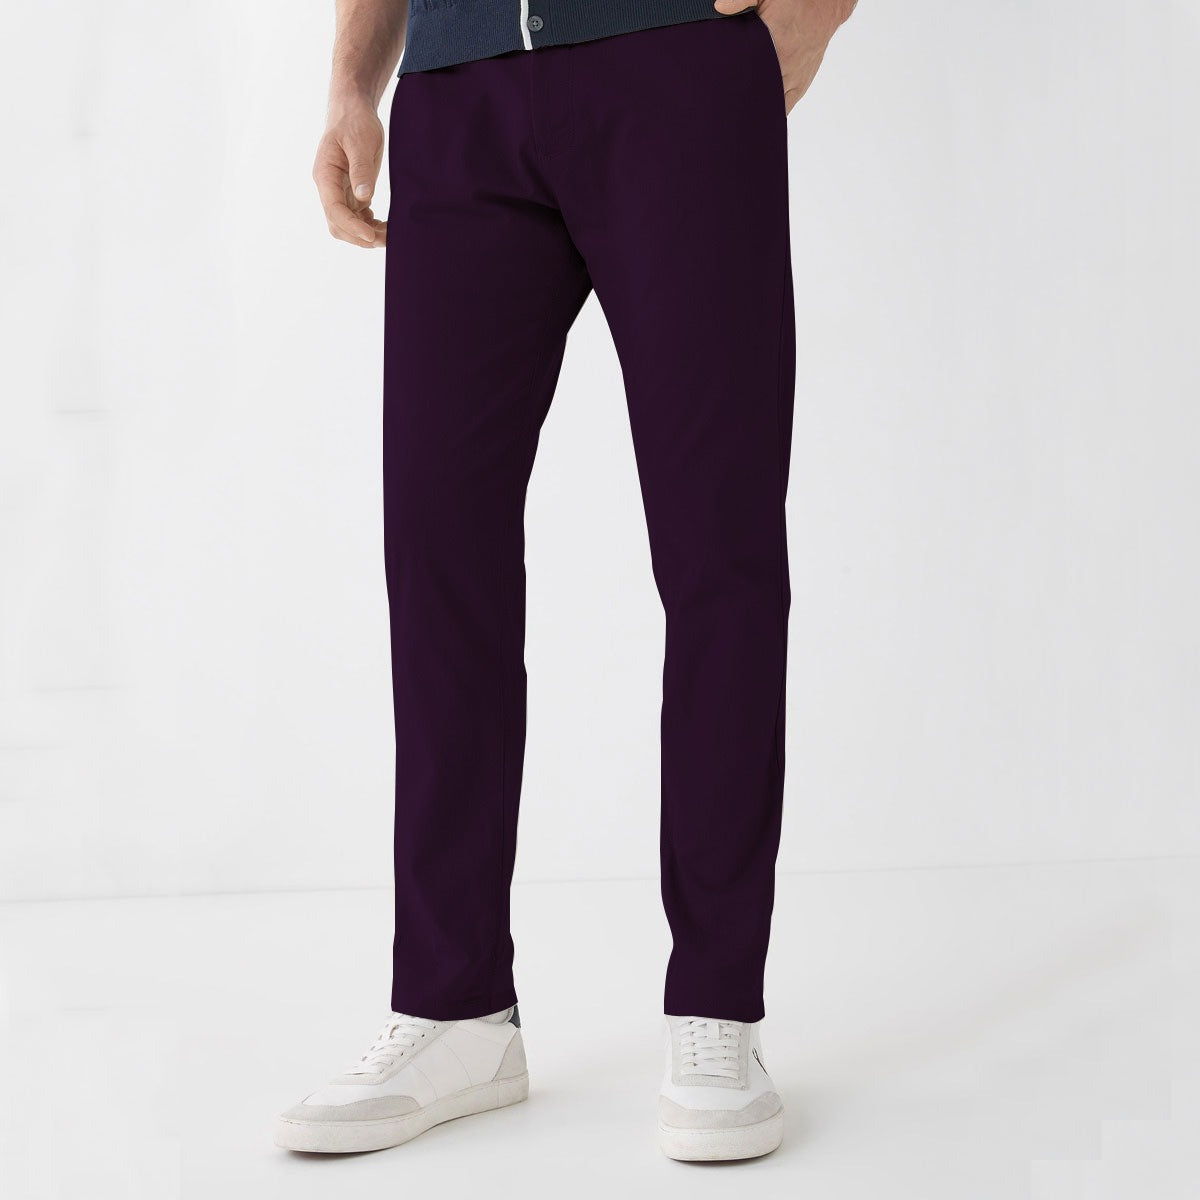 Buy Trousers & Chinos from top Brands at Best Prices Online in India | Tata  CLiQ